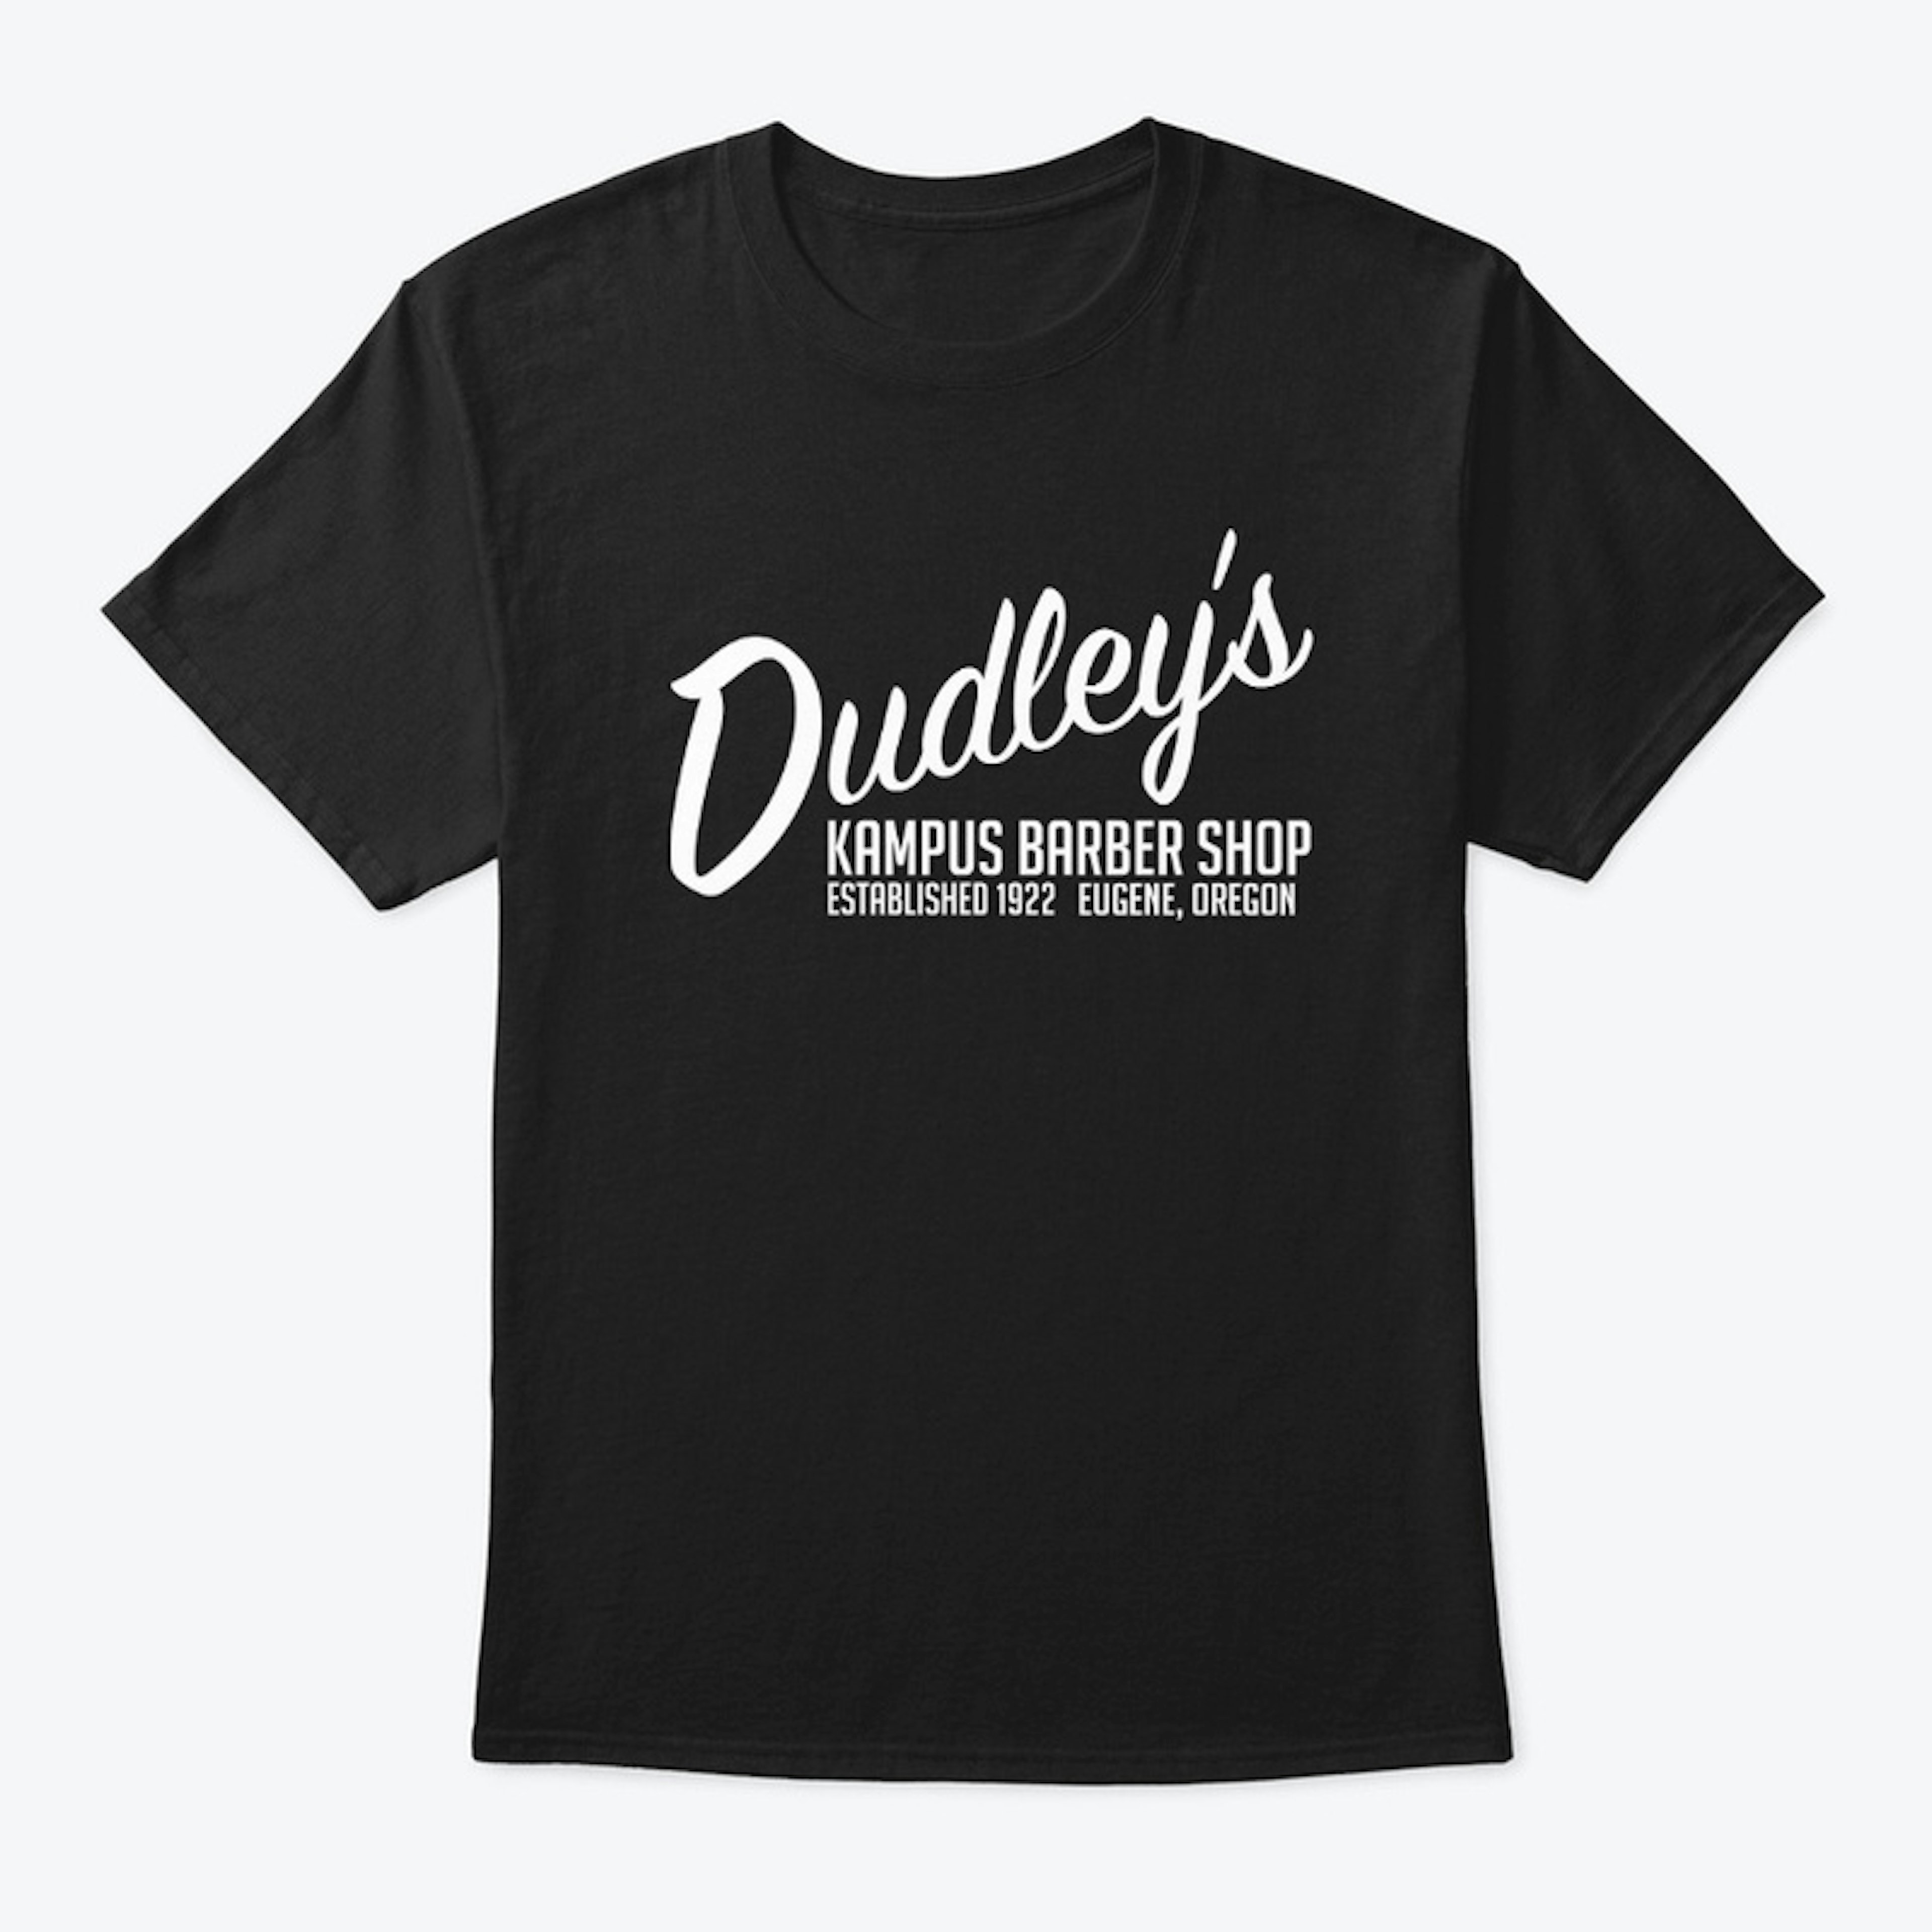 Dudley's 2020 collection 